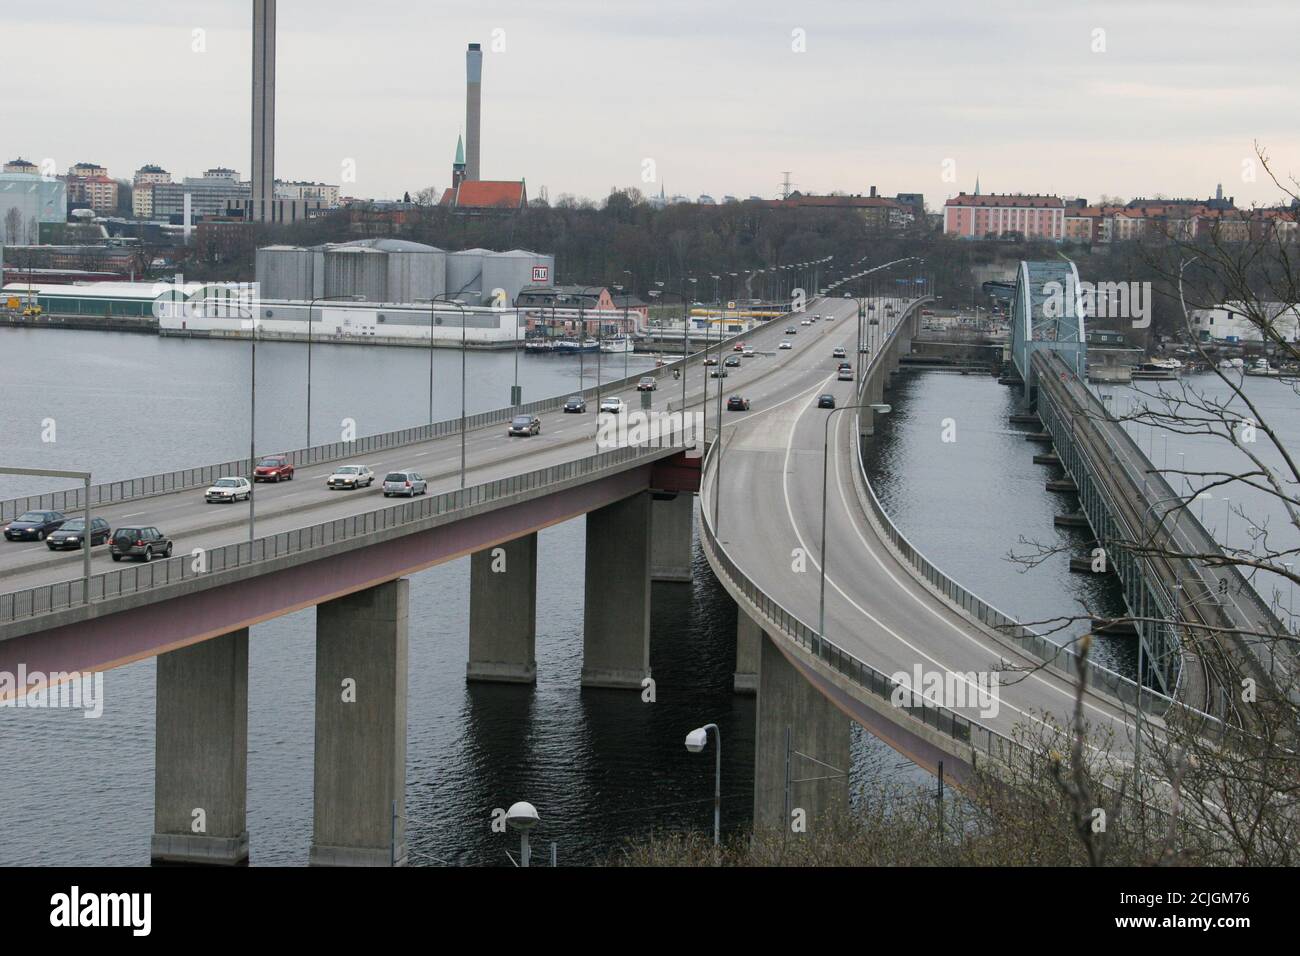 LIDINGÖ BRIDGE Stockholm Sweden the new to left and the old t right connect Island and town Lidingö with the rest of Stockholm area Stock Photo